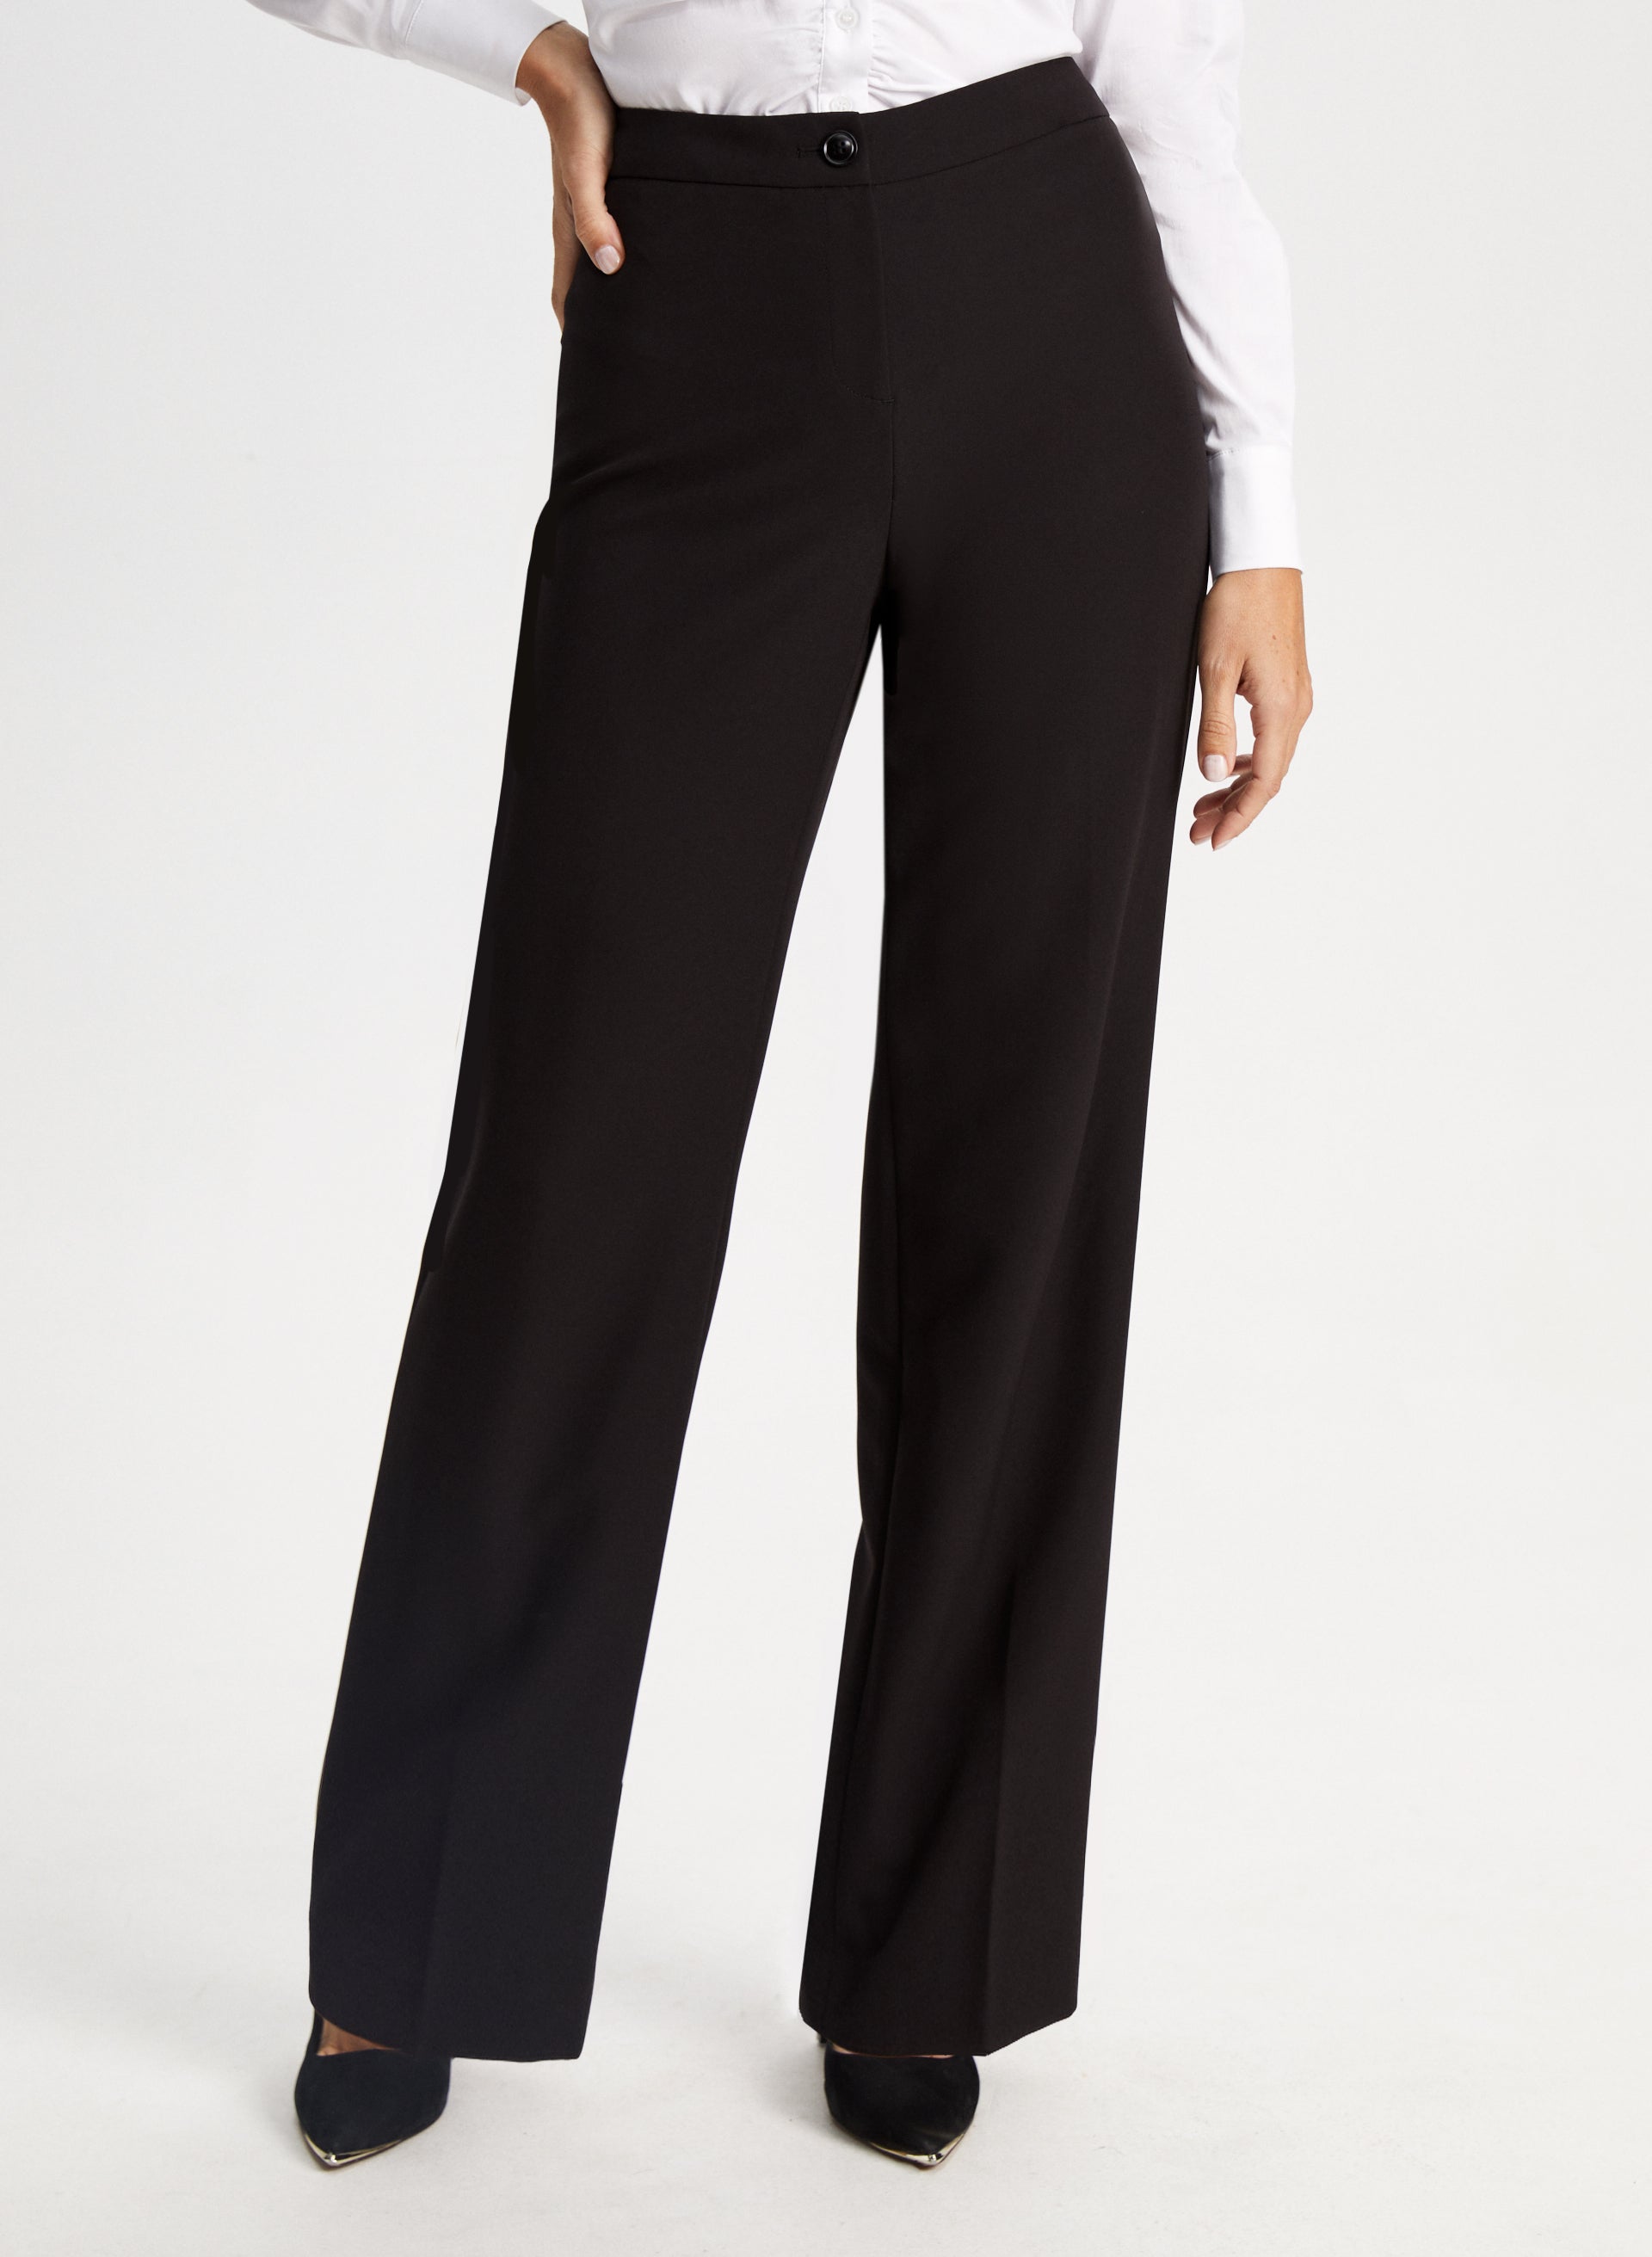 A New Day Women's 16 Black Pants Stretch Straight Leg Trousers Casual Fit -  $15 - From Brittany Thrifts